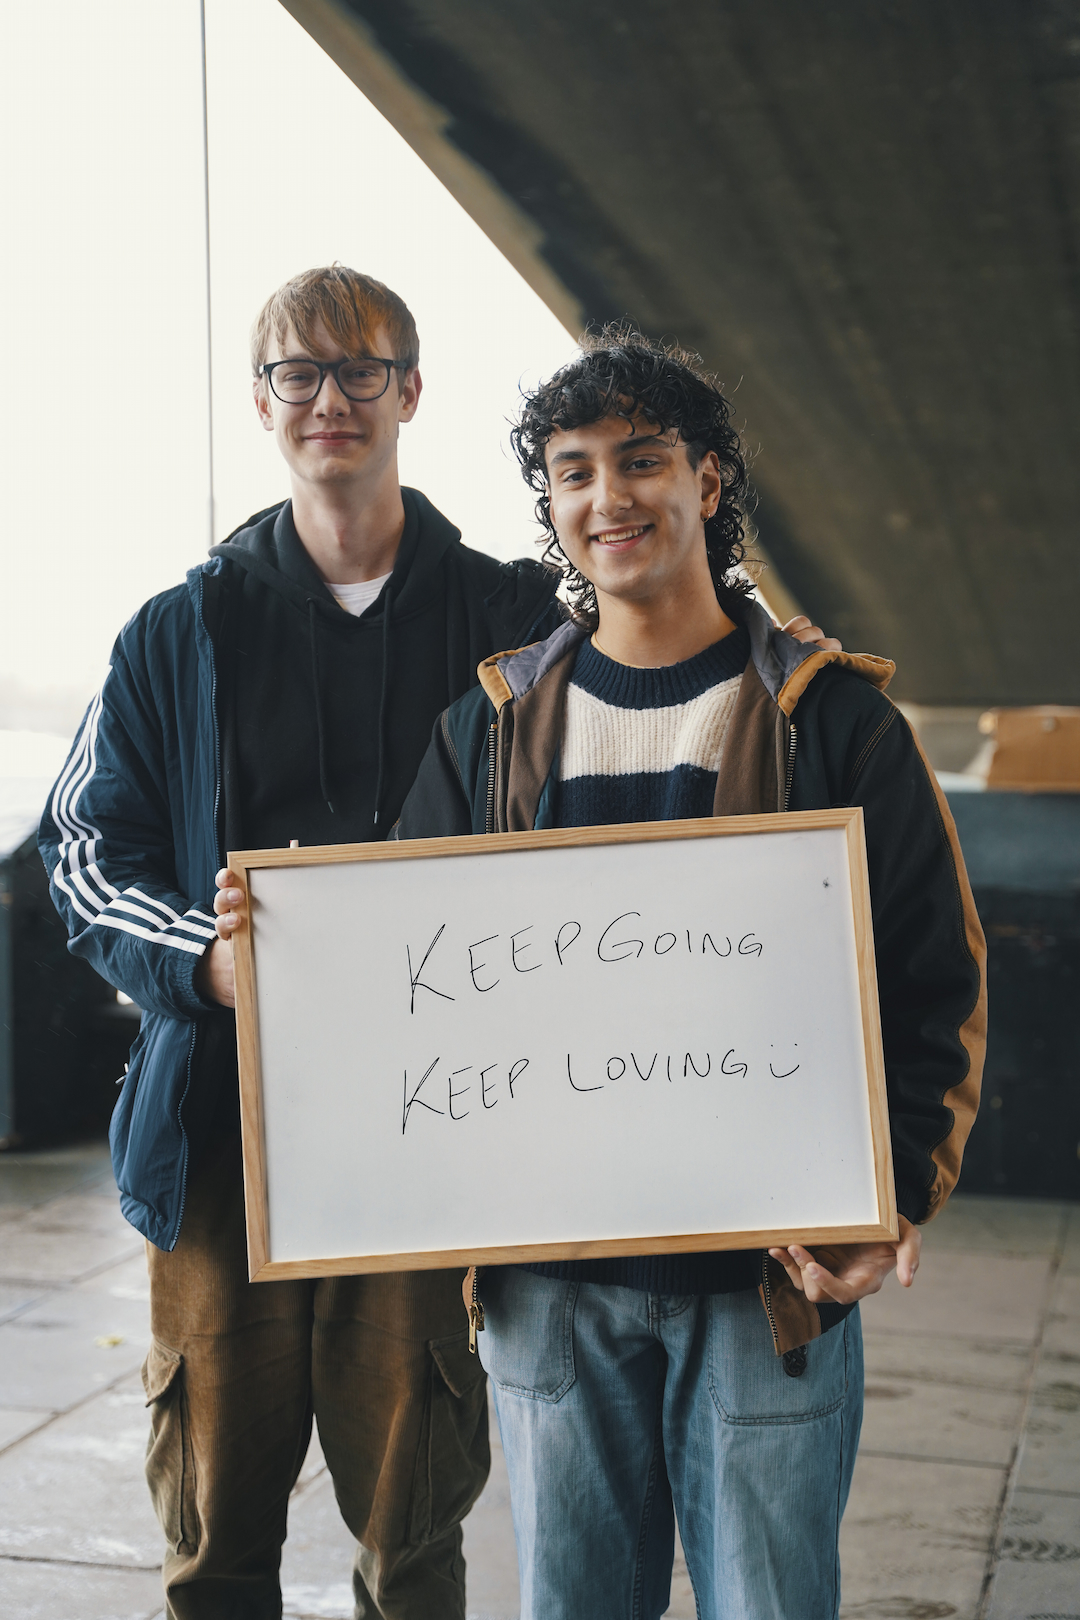 Two young adults holding a whiteboard saying 'Keep going, keep loving'.